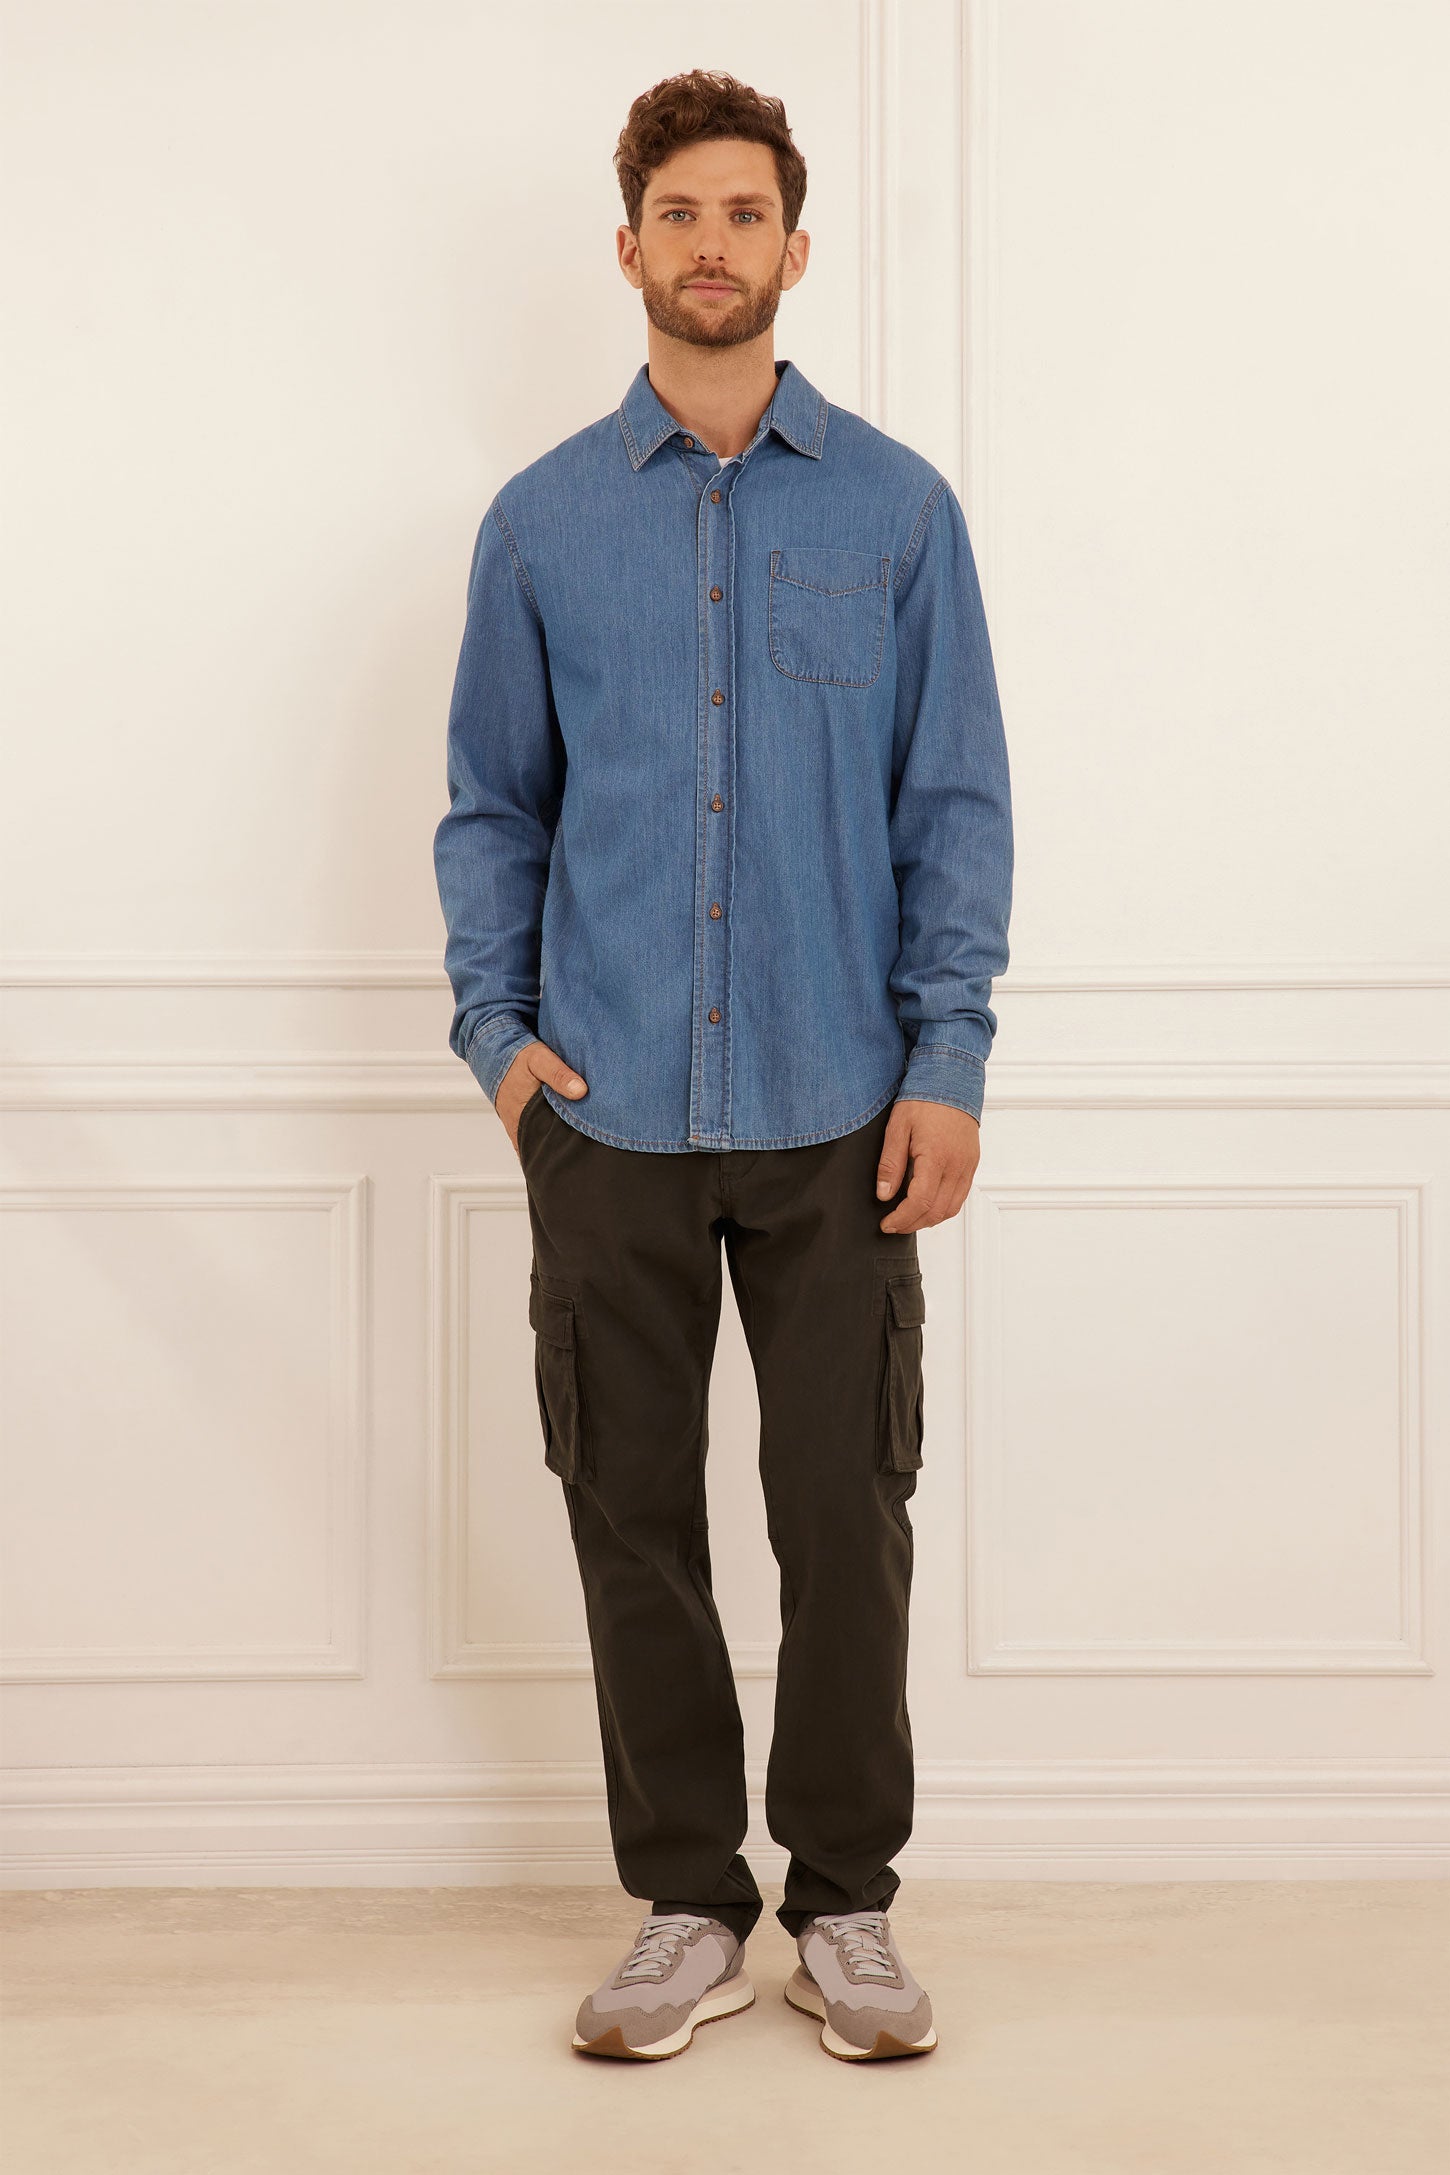 LEVI'S - Men's Western shirt with contrasting collar - GH-Stores.com